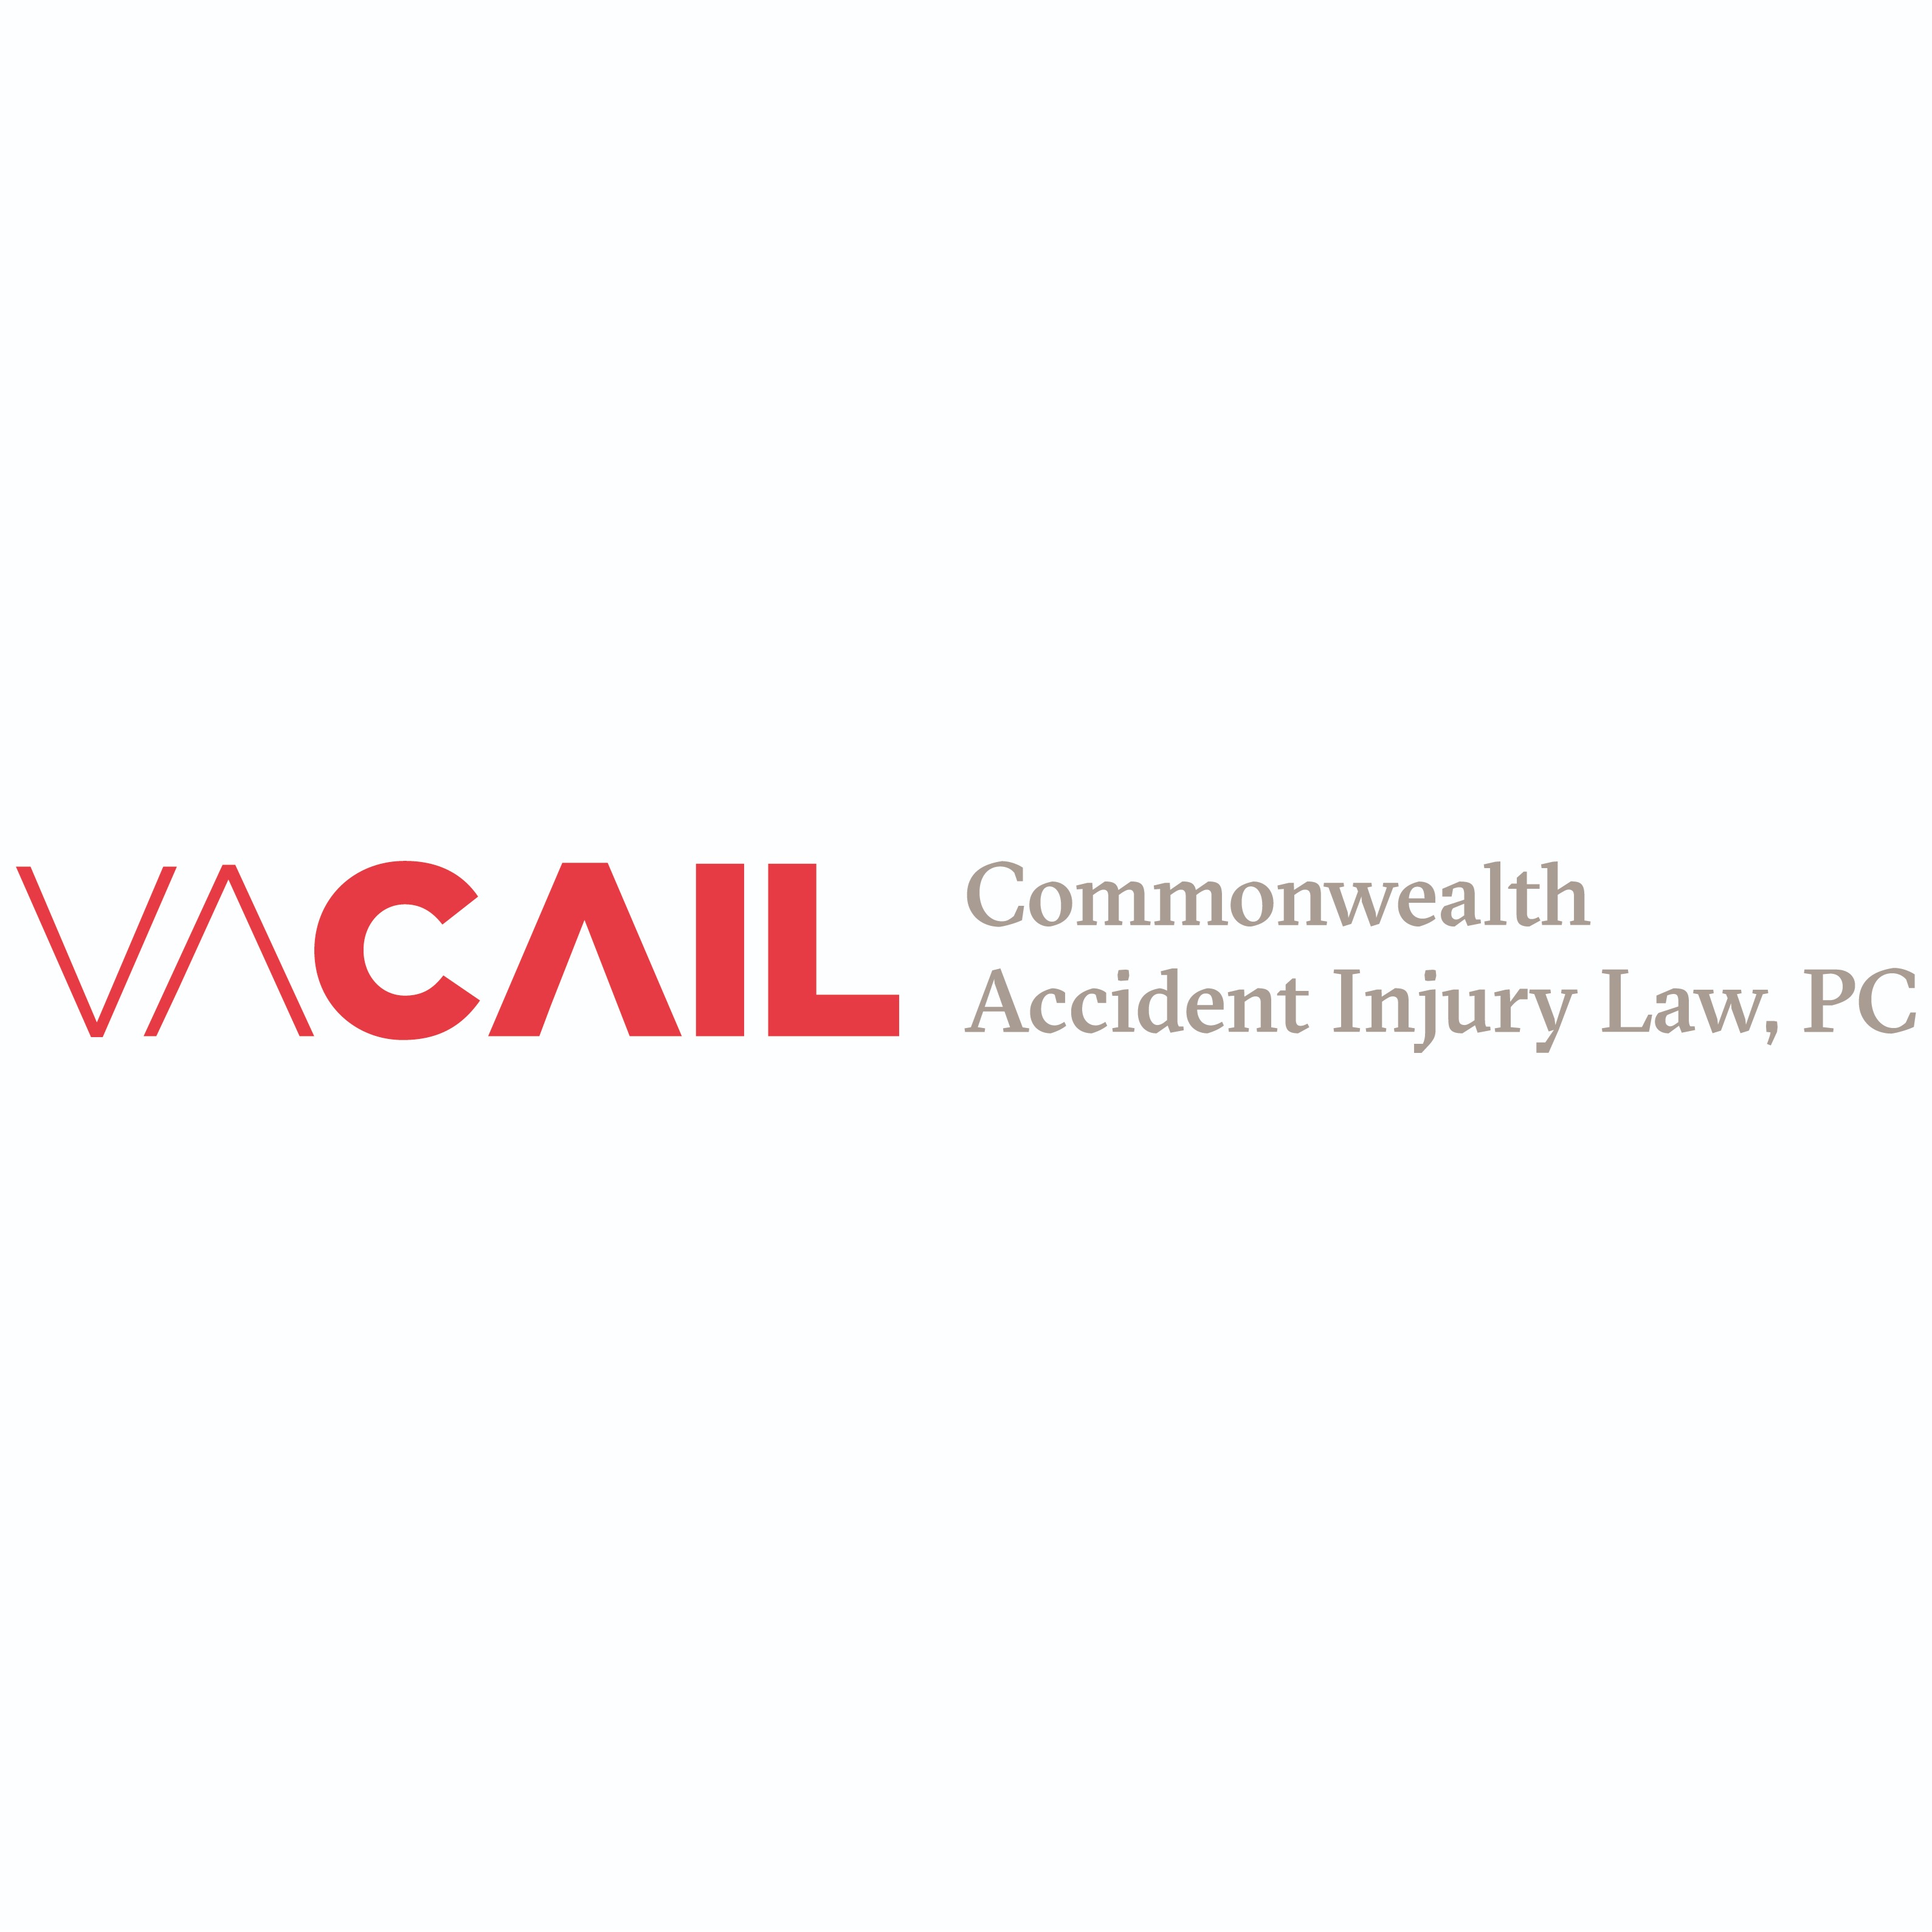 Commonwealth Accident Injury Law, PC Logo